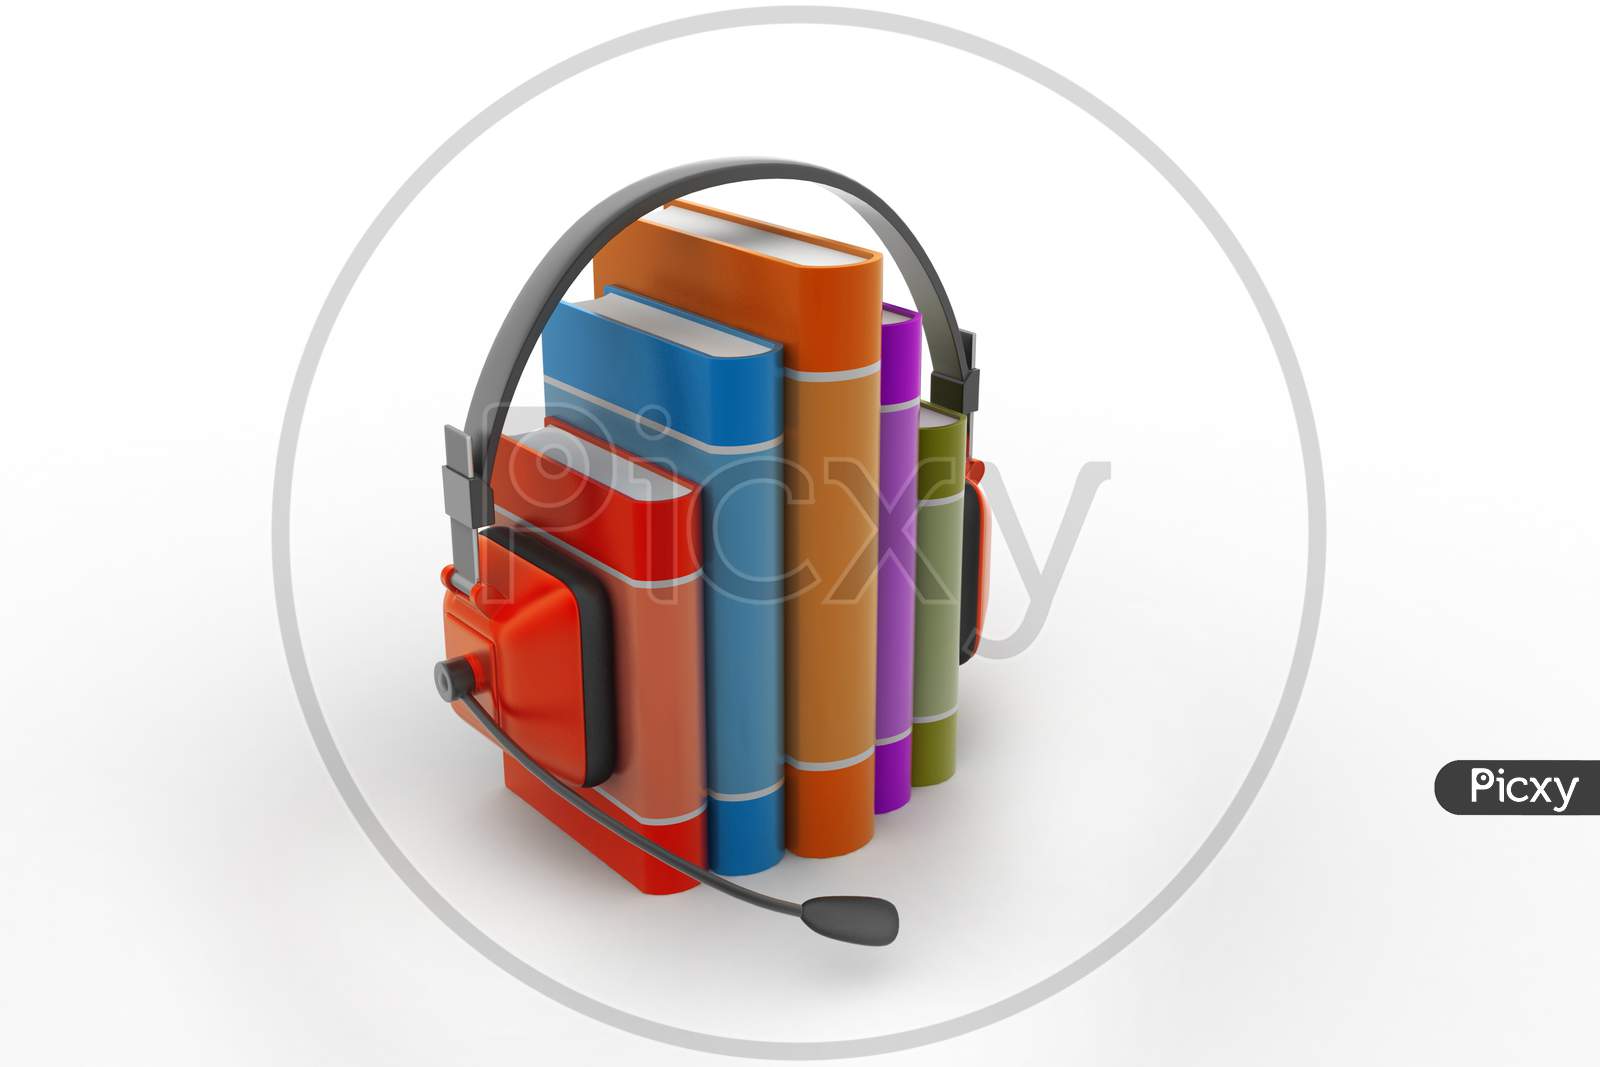 Audio Book Concept With Headphones And Books